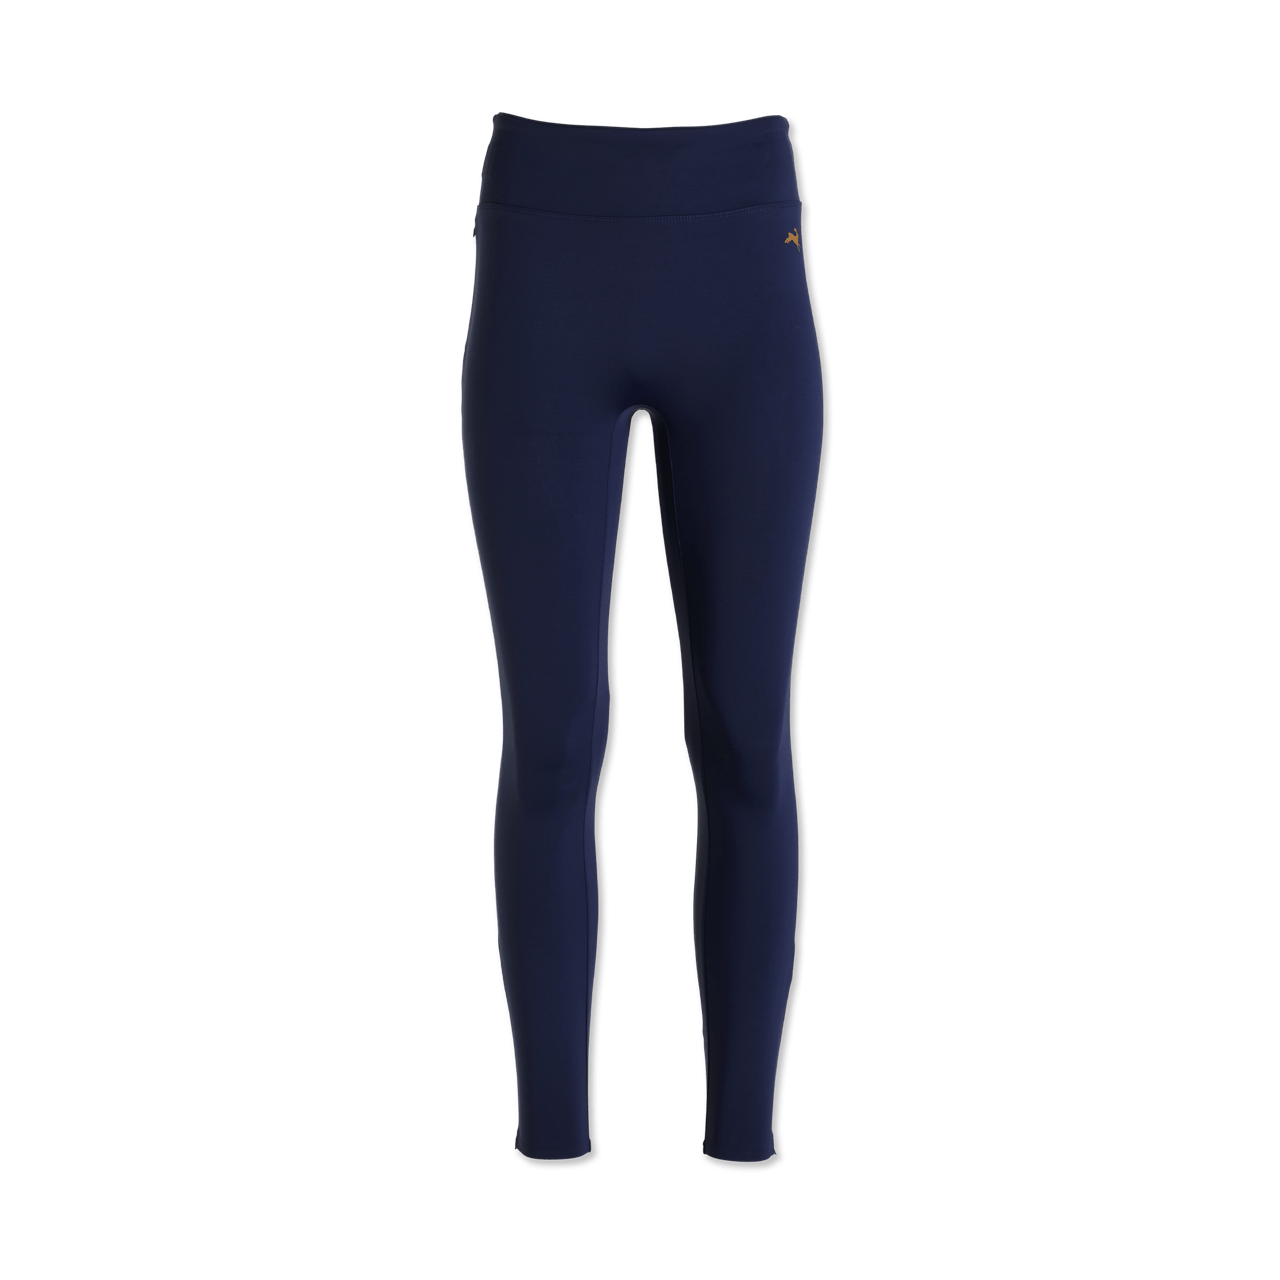 Women's turnover tights—what's the hype? : r/Tracksmith